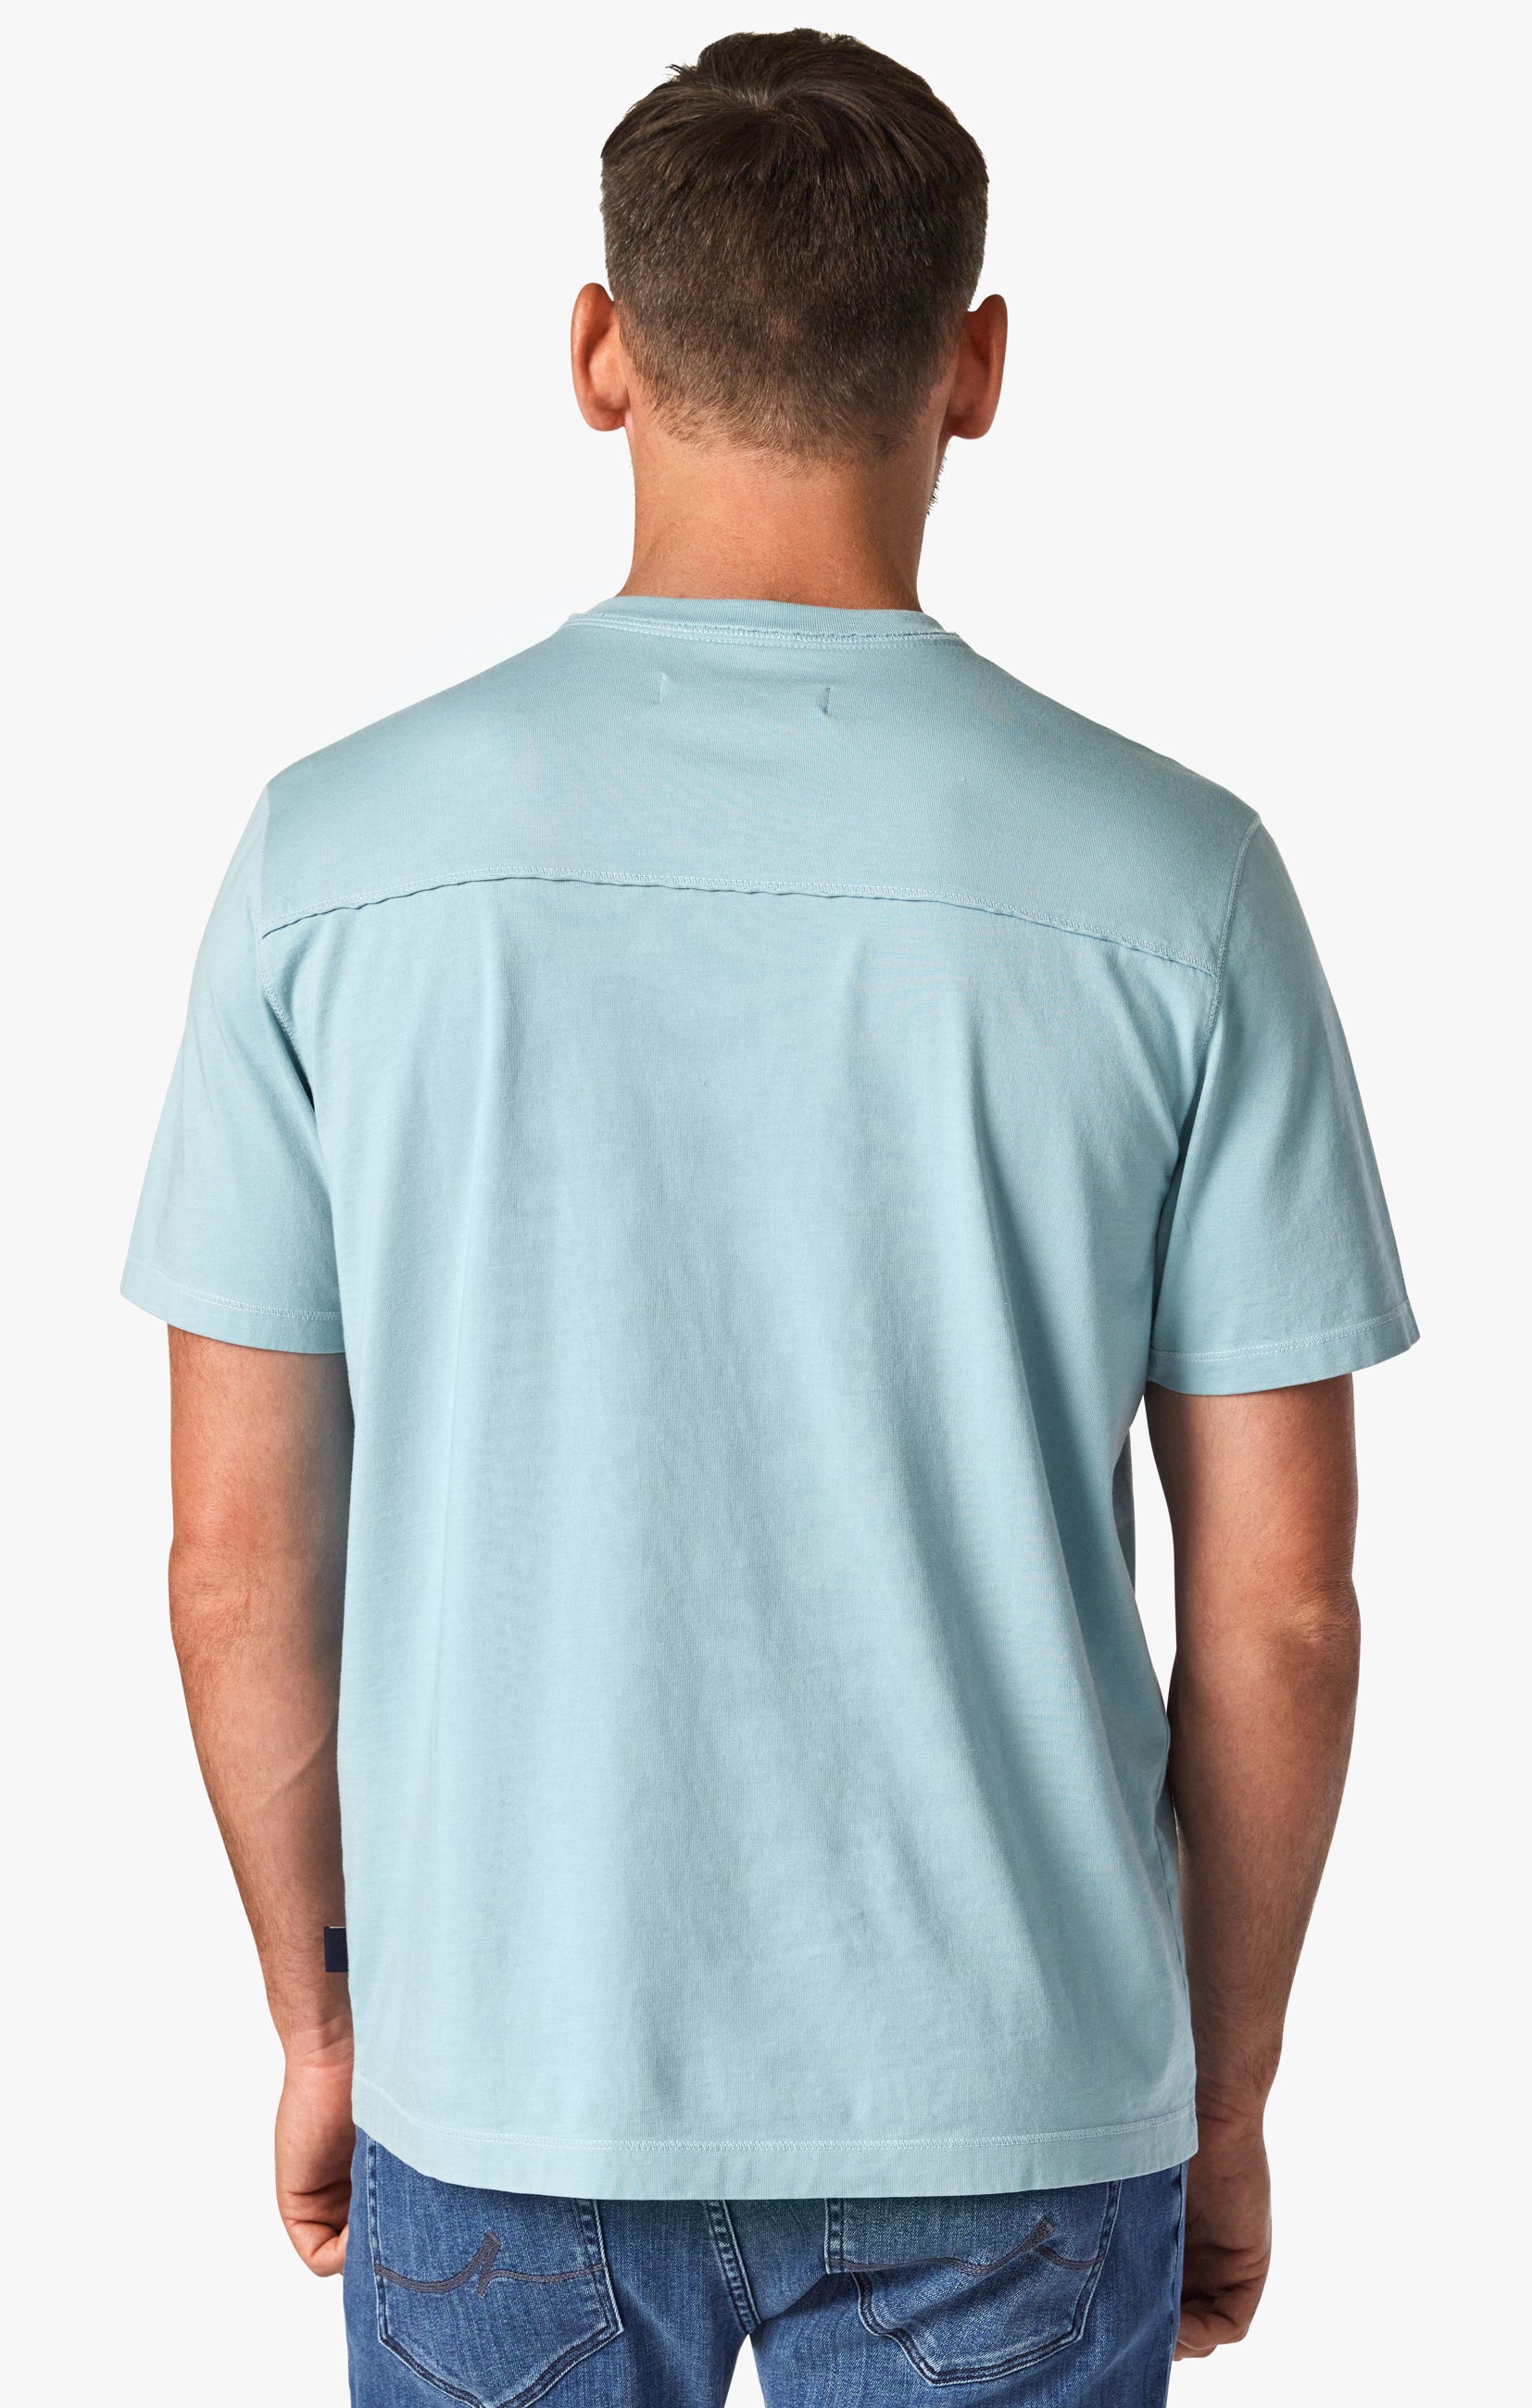 Deconstructed V-Neck T-Shirt in Forget-Me-Not Image 6